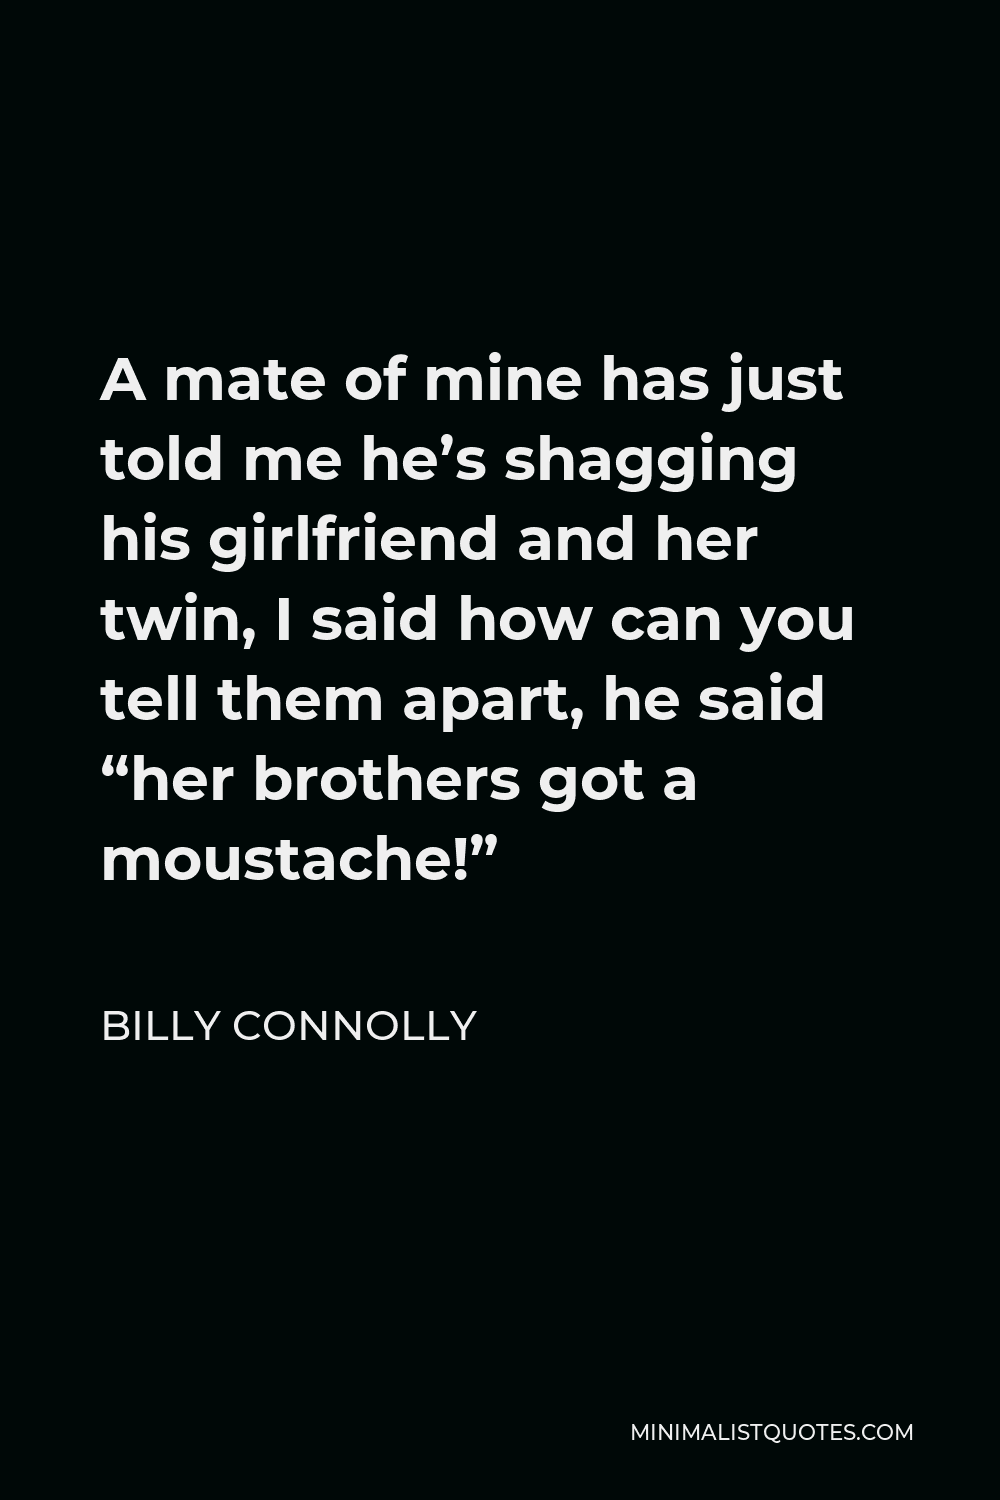 Billy Connolly Quote - A mate of mine has just told me he’s shagging his girlfriend and her twin, I said how can you tell them apart, he said “her brothers got a moustache!”